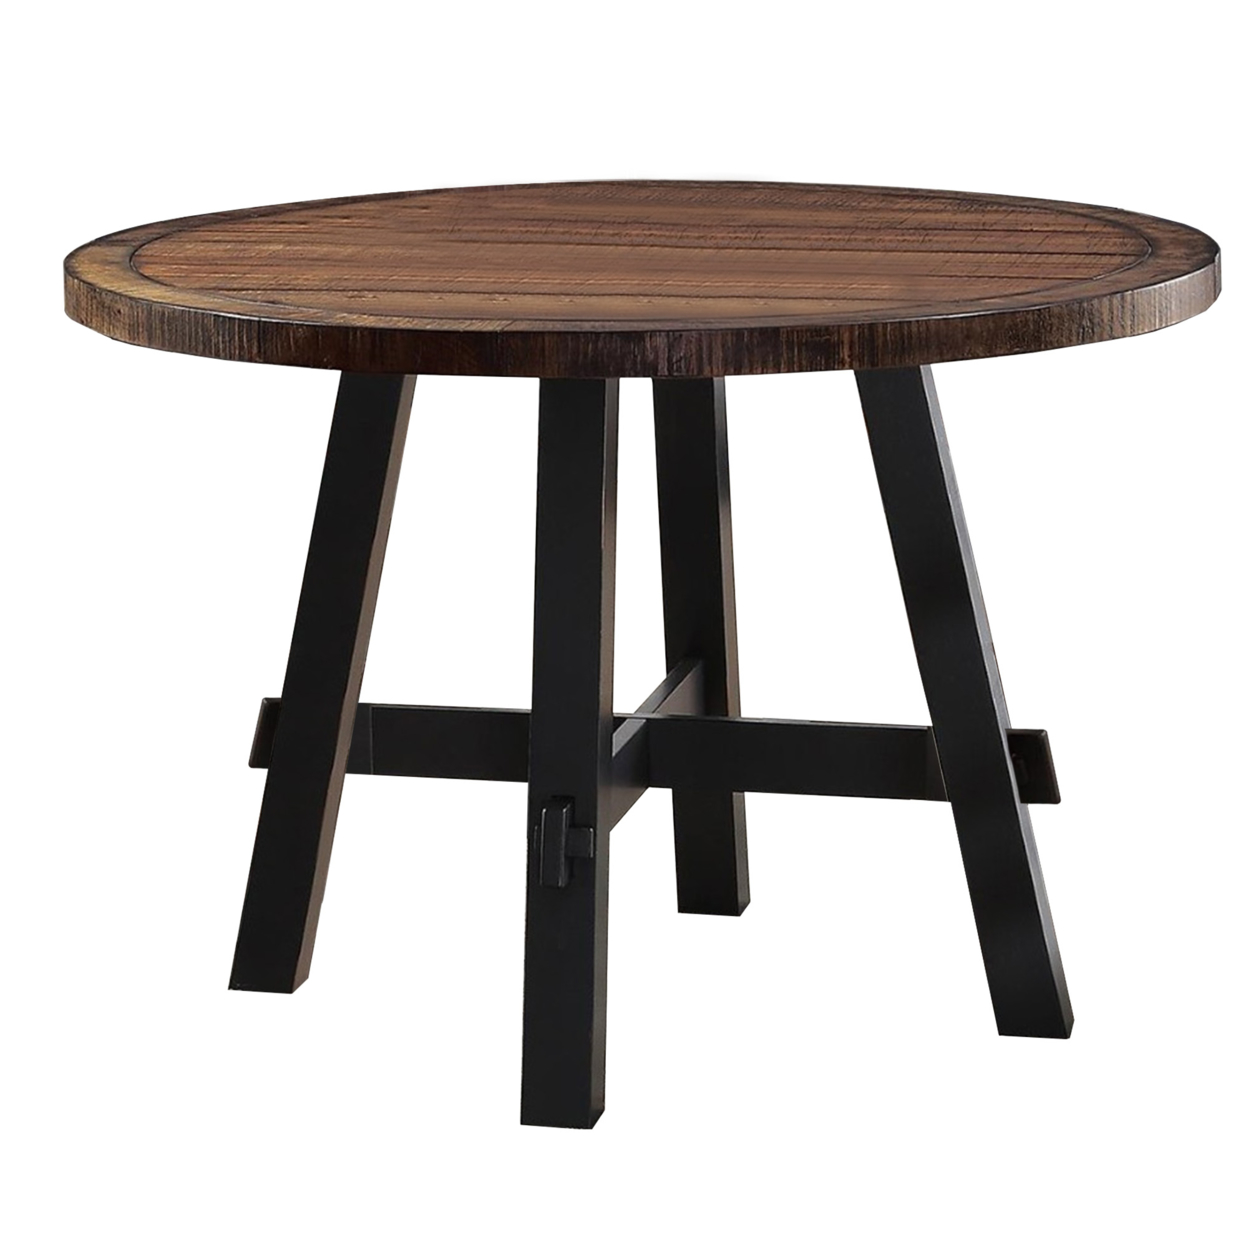 Cottage Style Round Wooden Dining Table Brown- Saltoro Sherpi